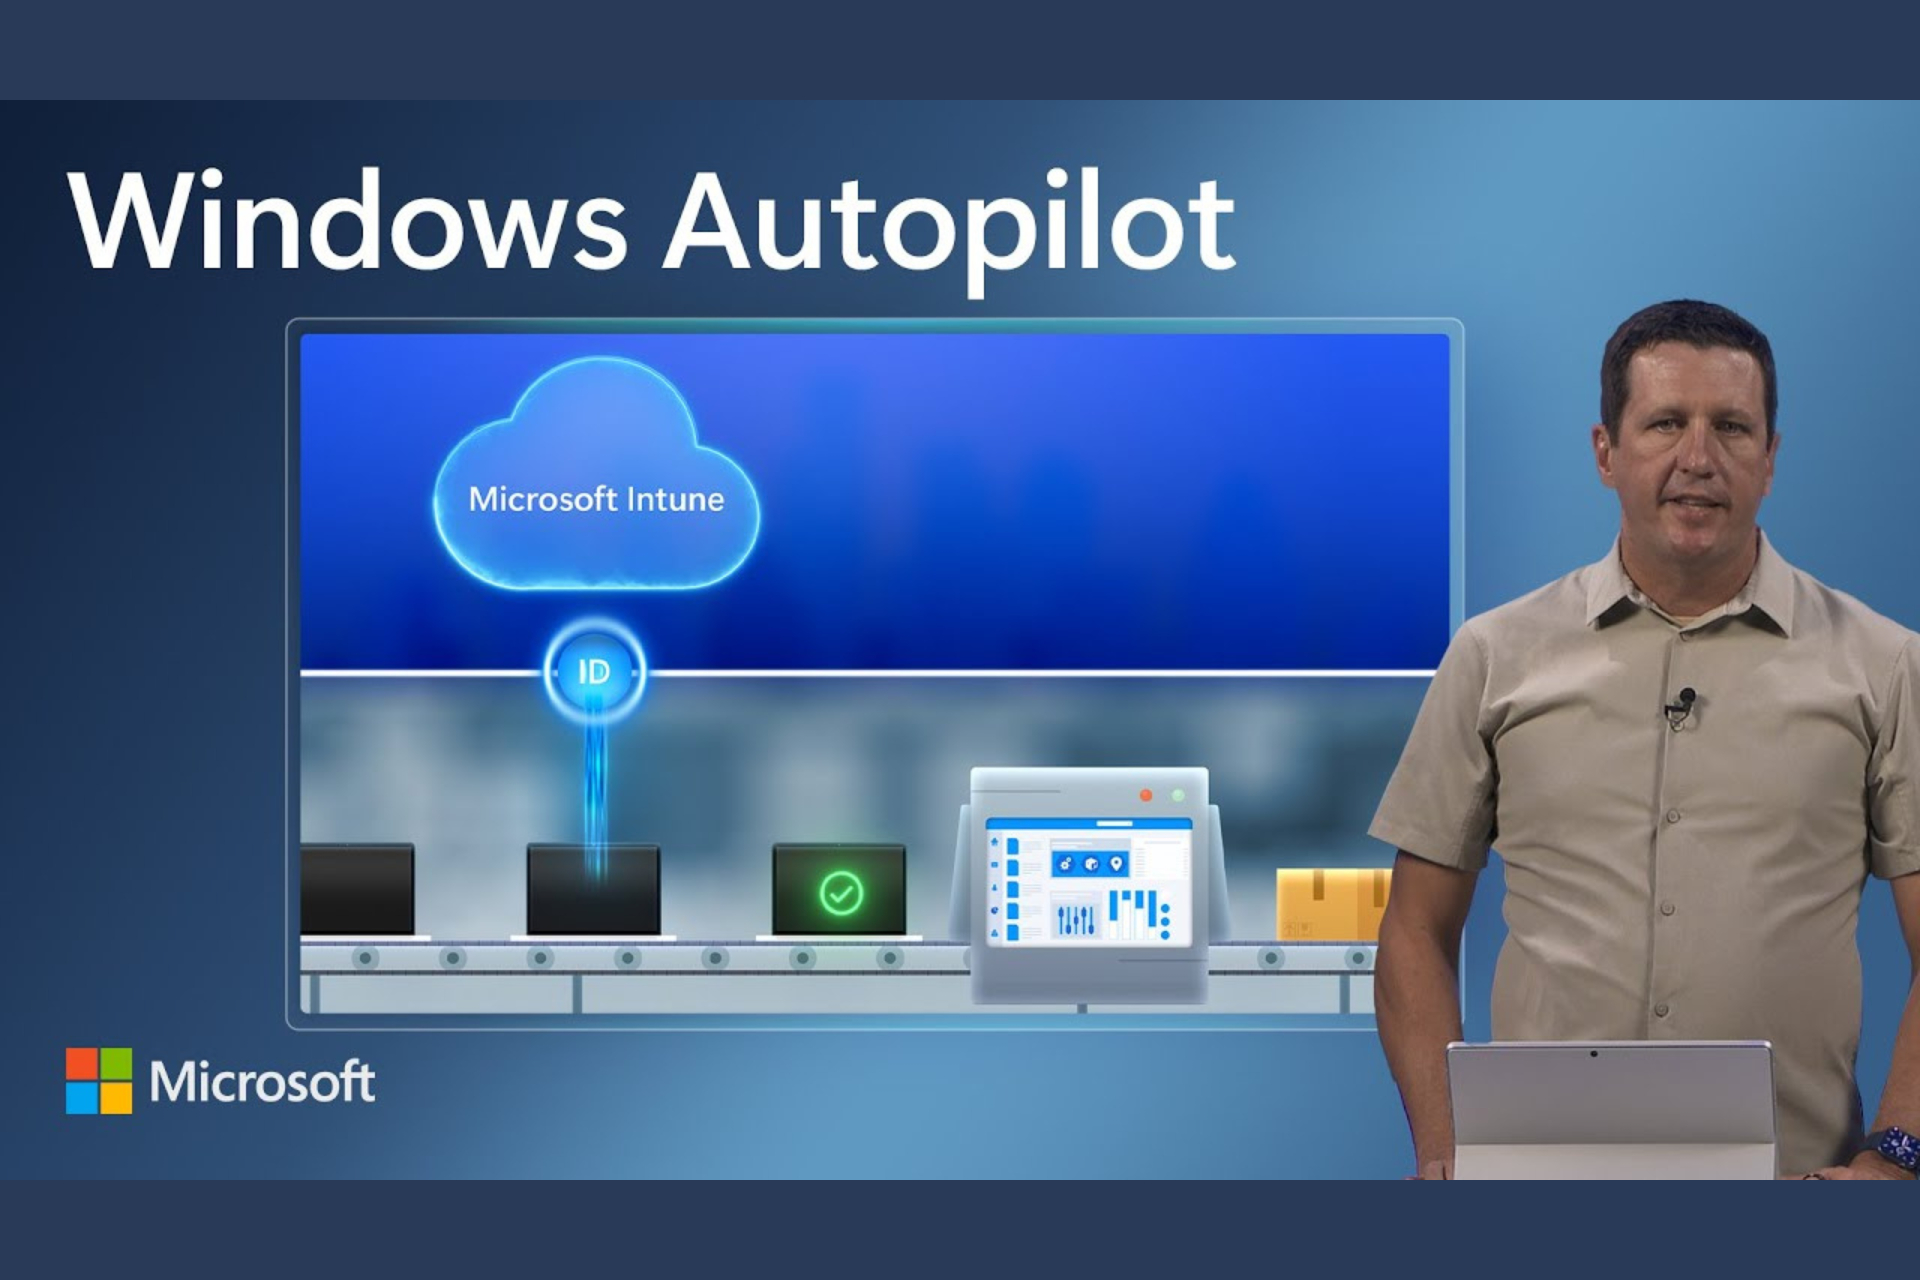 Installing Windows 11 using Autopilot took more than 15 hours